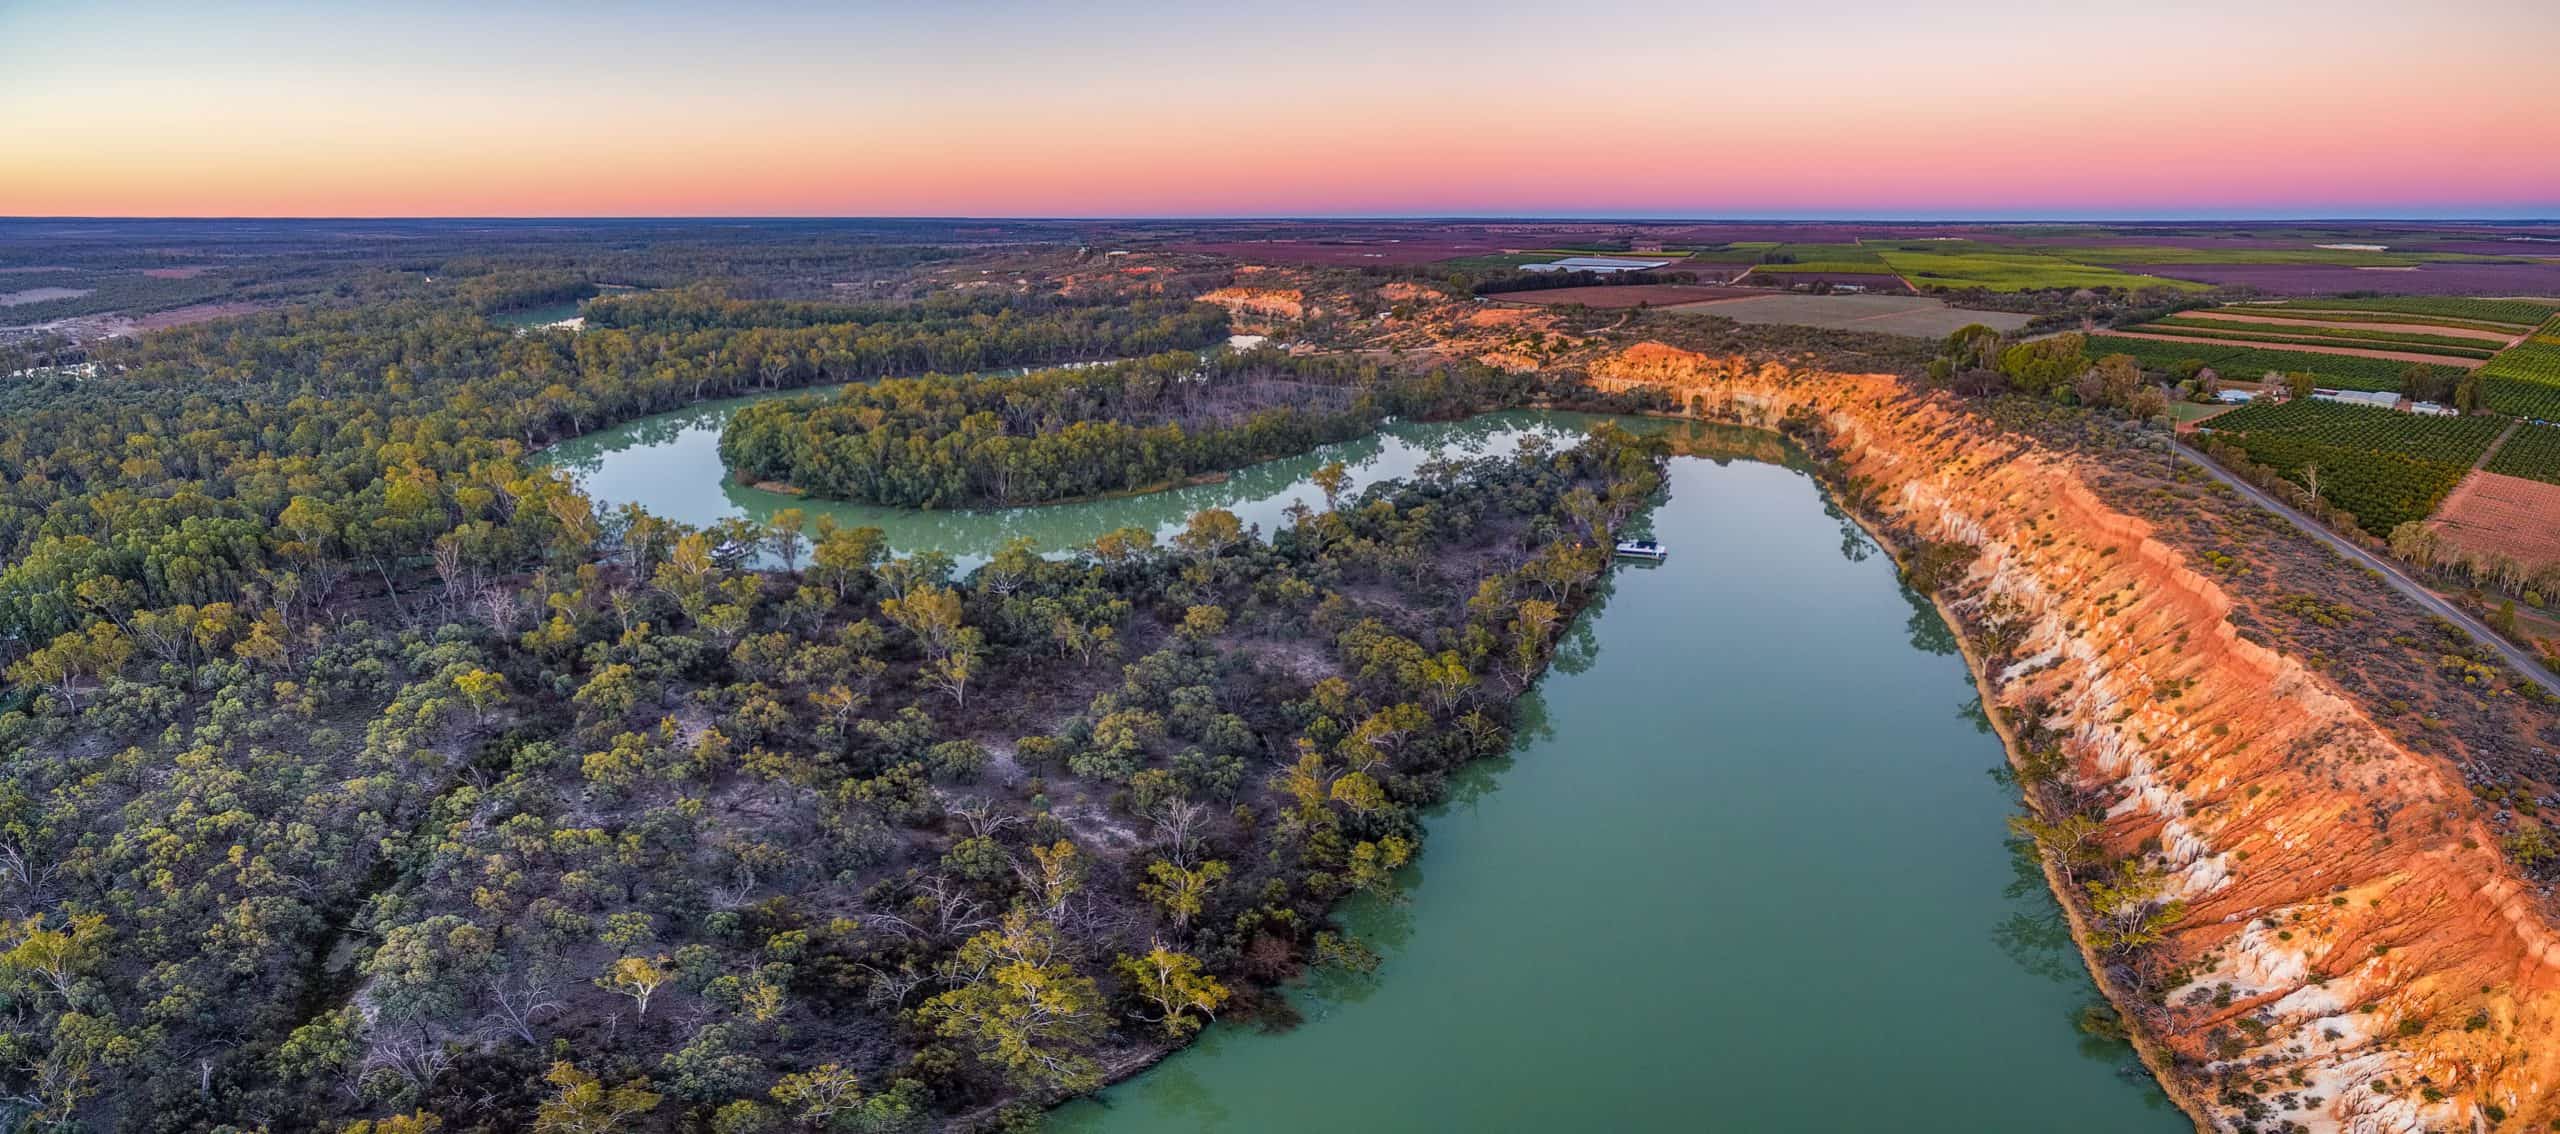 15-mind-blowing-facts-about-murray-darling-river